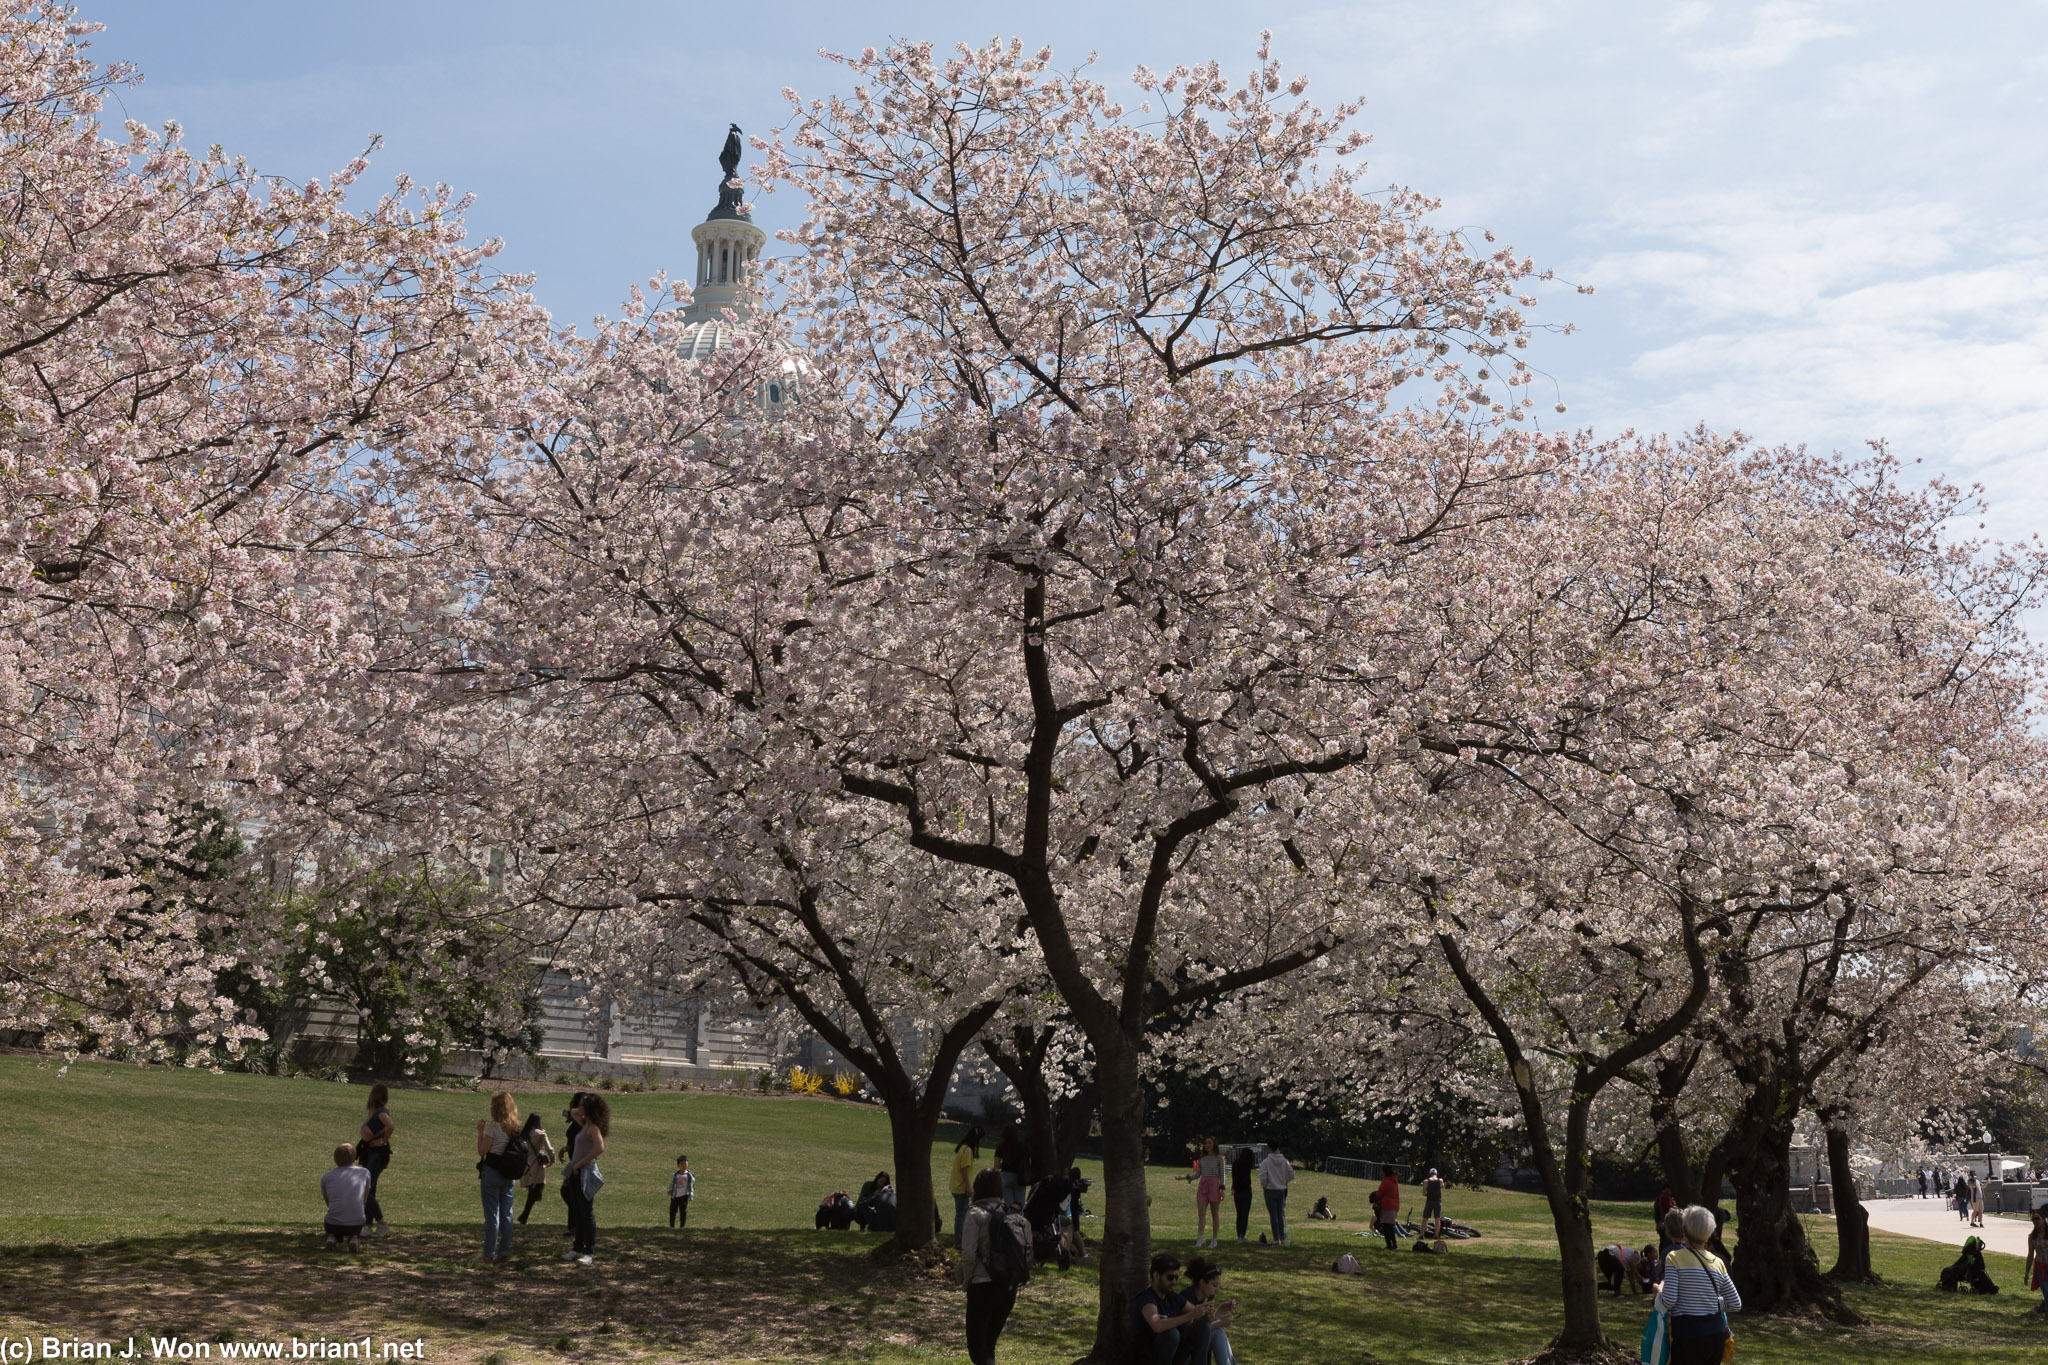 Cherry trees in the foreground.